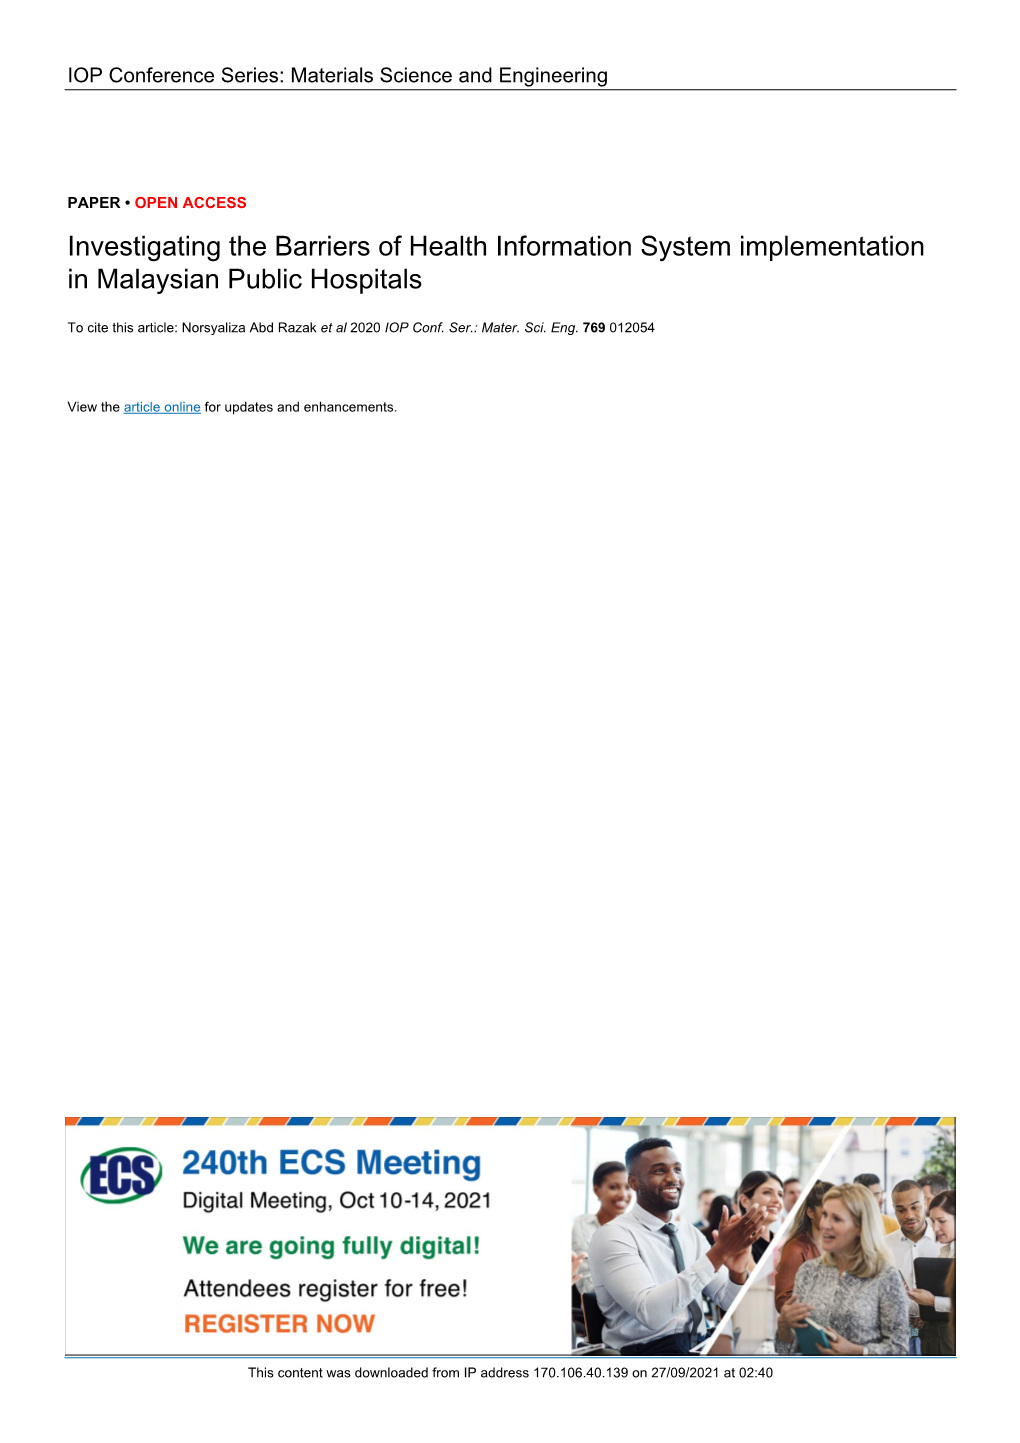 Investigating the Barriers of Health Information System Implementation in Malaysian Public Hospitals